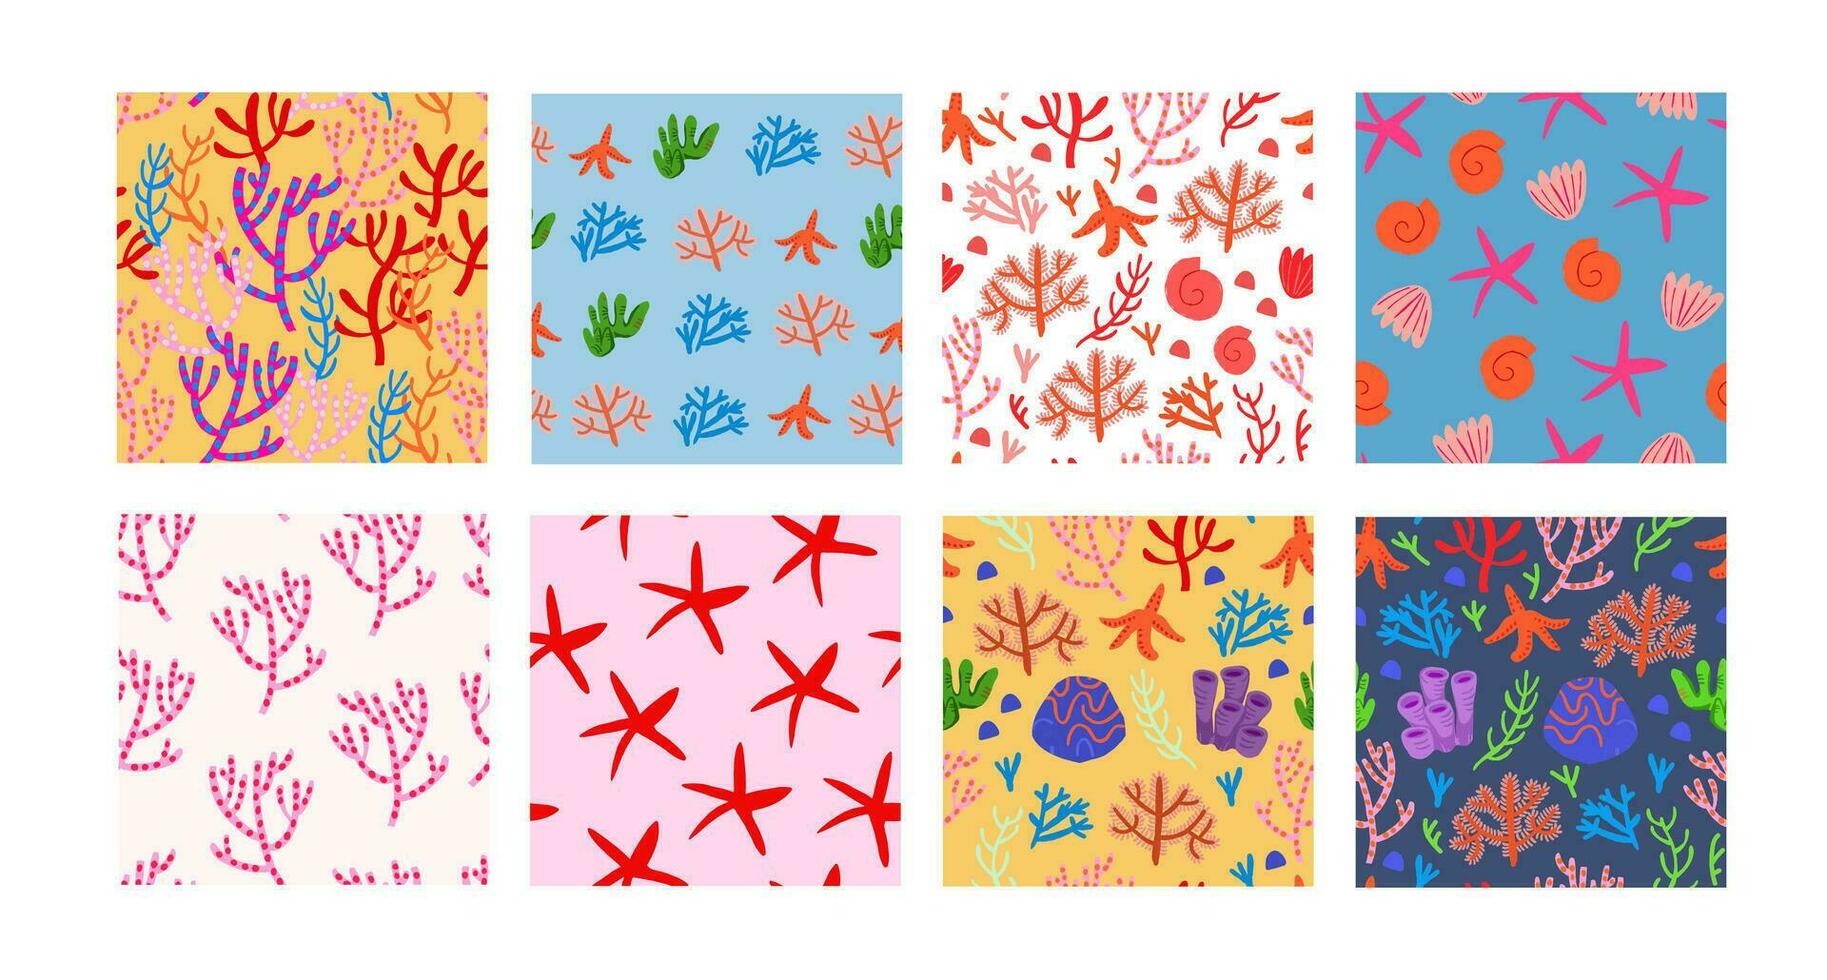 Pattern bundle with underwater world patterns, coral reefs, sea star, seashell, under the sea tropical resort pattern collection vector